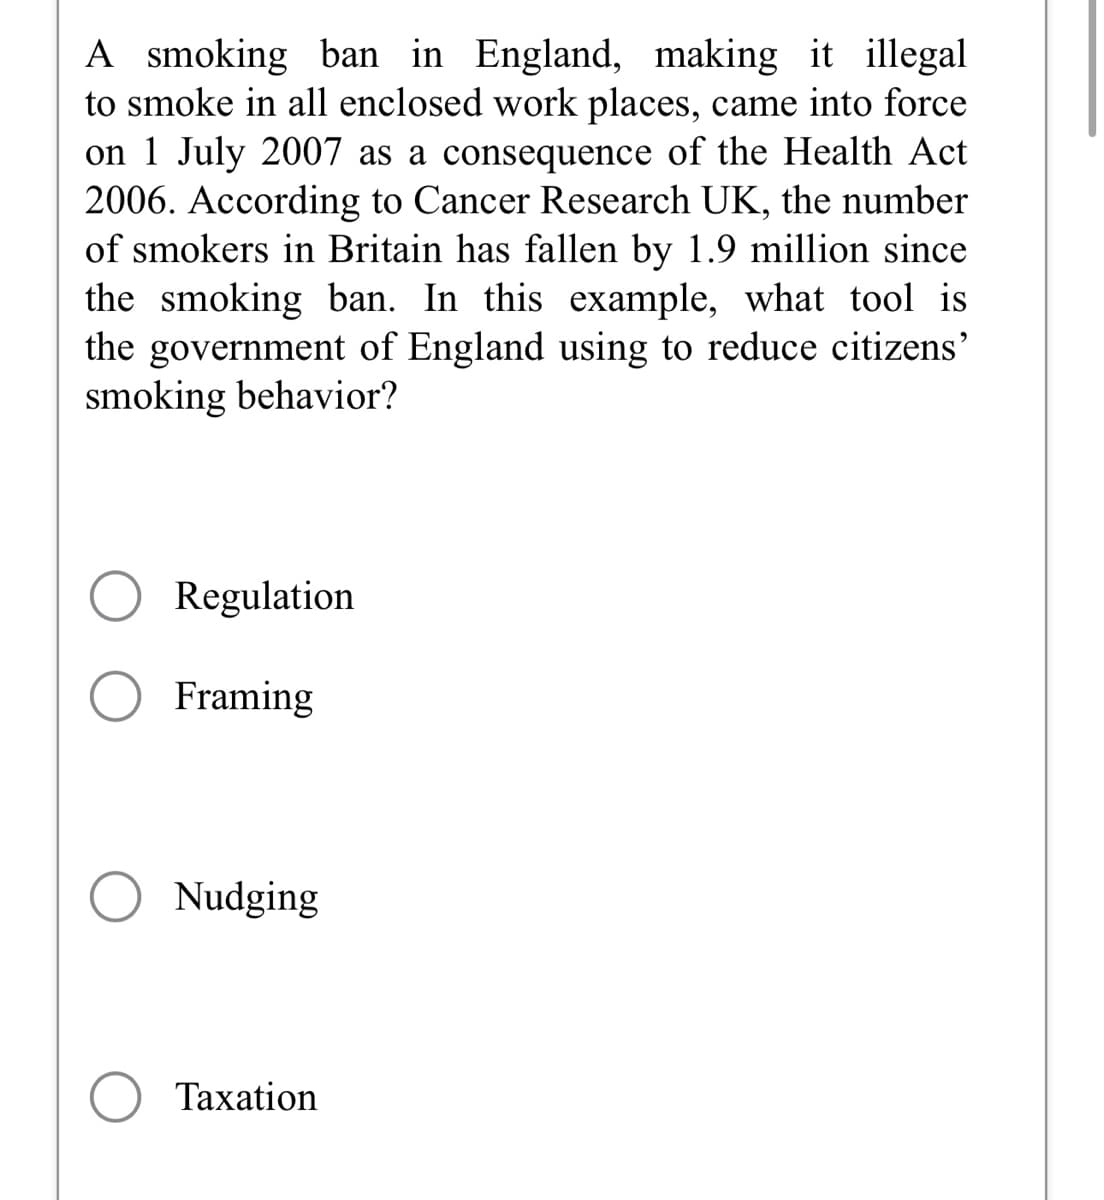 A smoking ban in England, making it illegal
to smoke in all enclosed work places, came into force
on 1 July 2007 as a consequence of the Health Act
2006. According to Cancer Research UK, the number
of smokers in Britain has fallen by 1.9 million since
the smoking ban. In this example, what tool is
the government of England using to reduce citizens'
smoking behavior?
Regulation
Framing
Nudging
Taxation